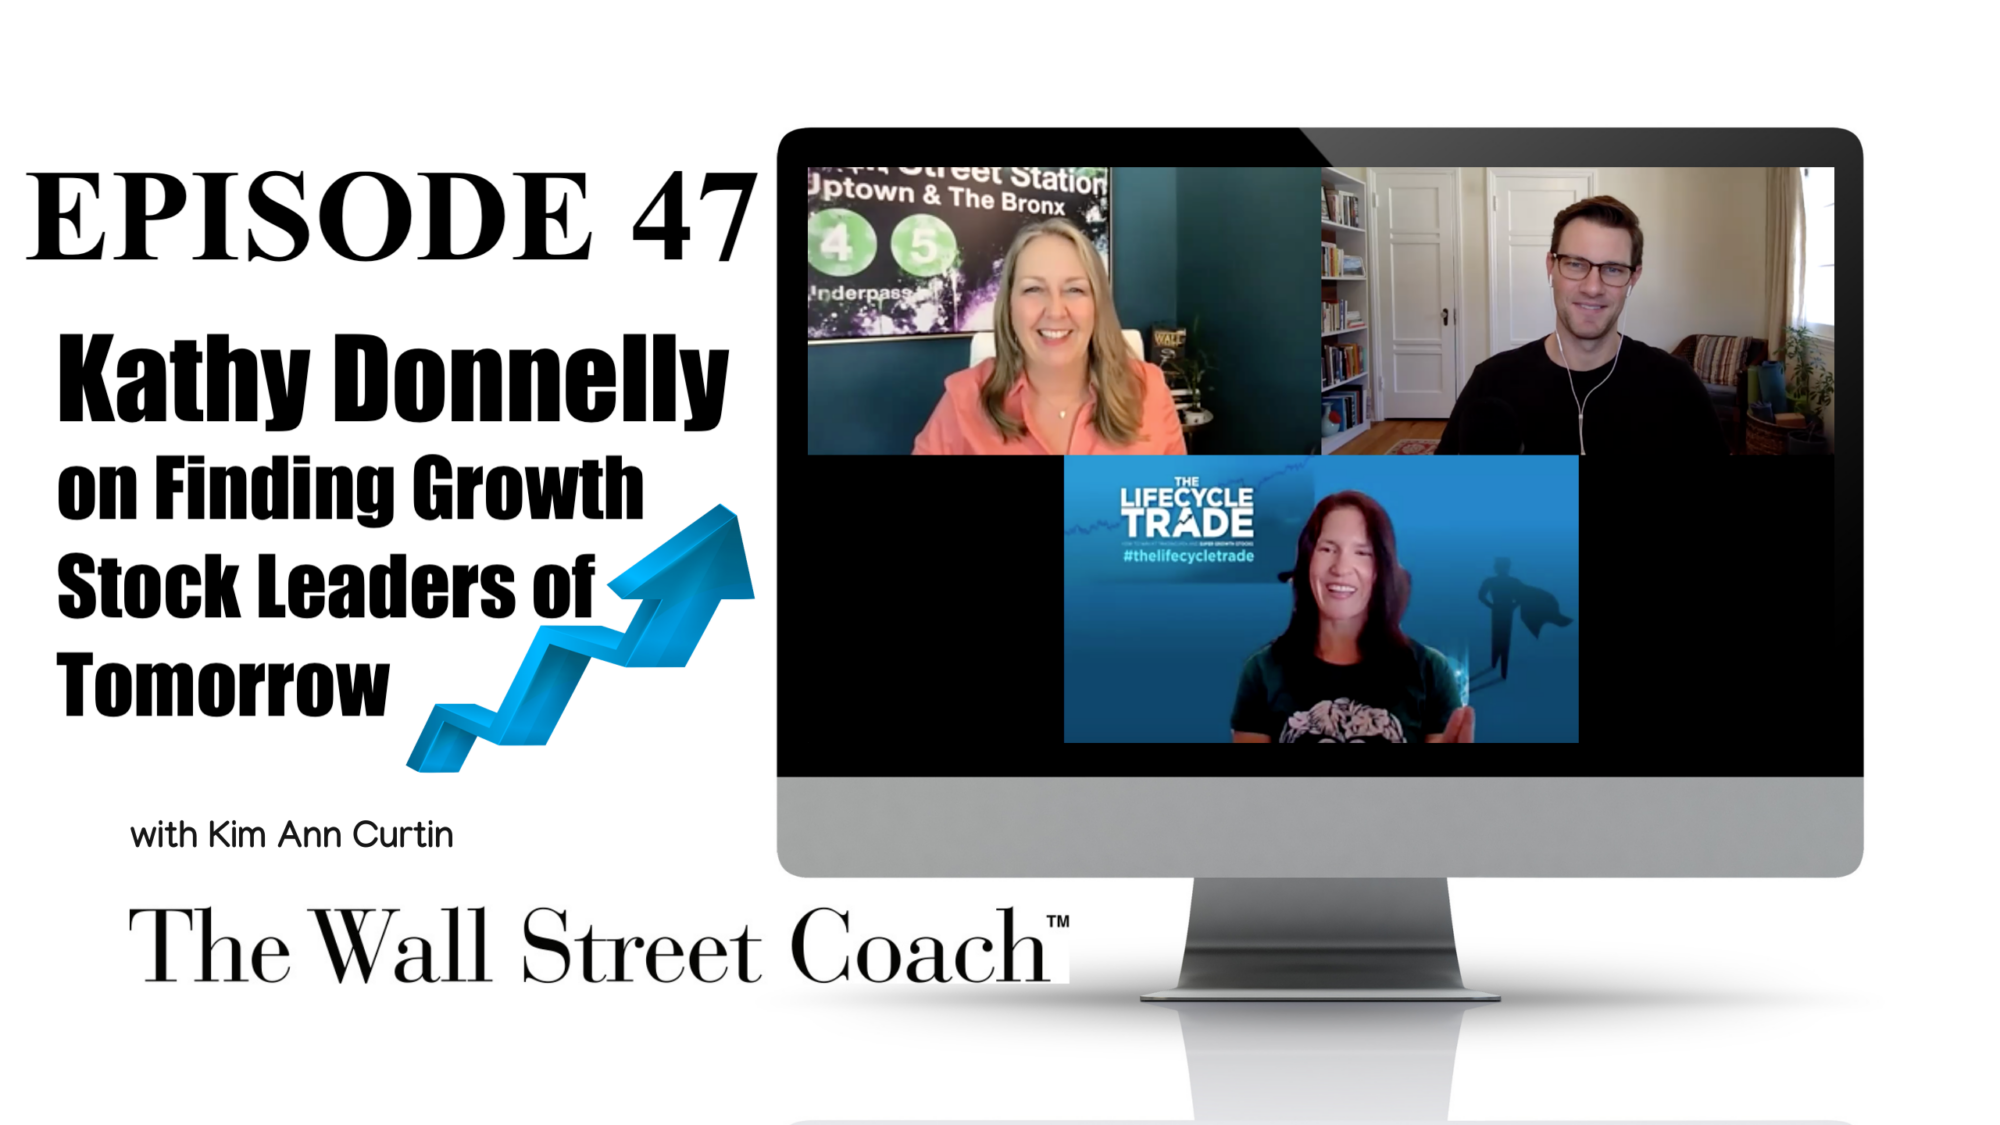 Episode 47: Kathy Donnelly on Finding Growth Stock Leaders of Tomorrow